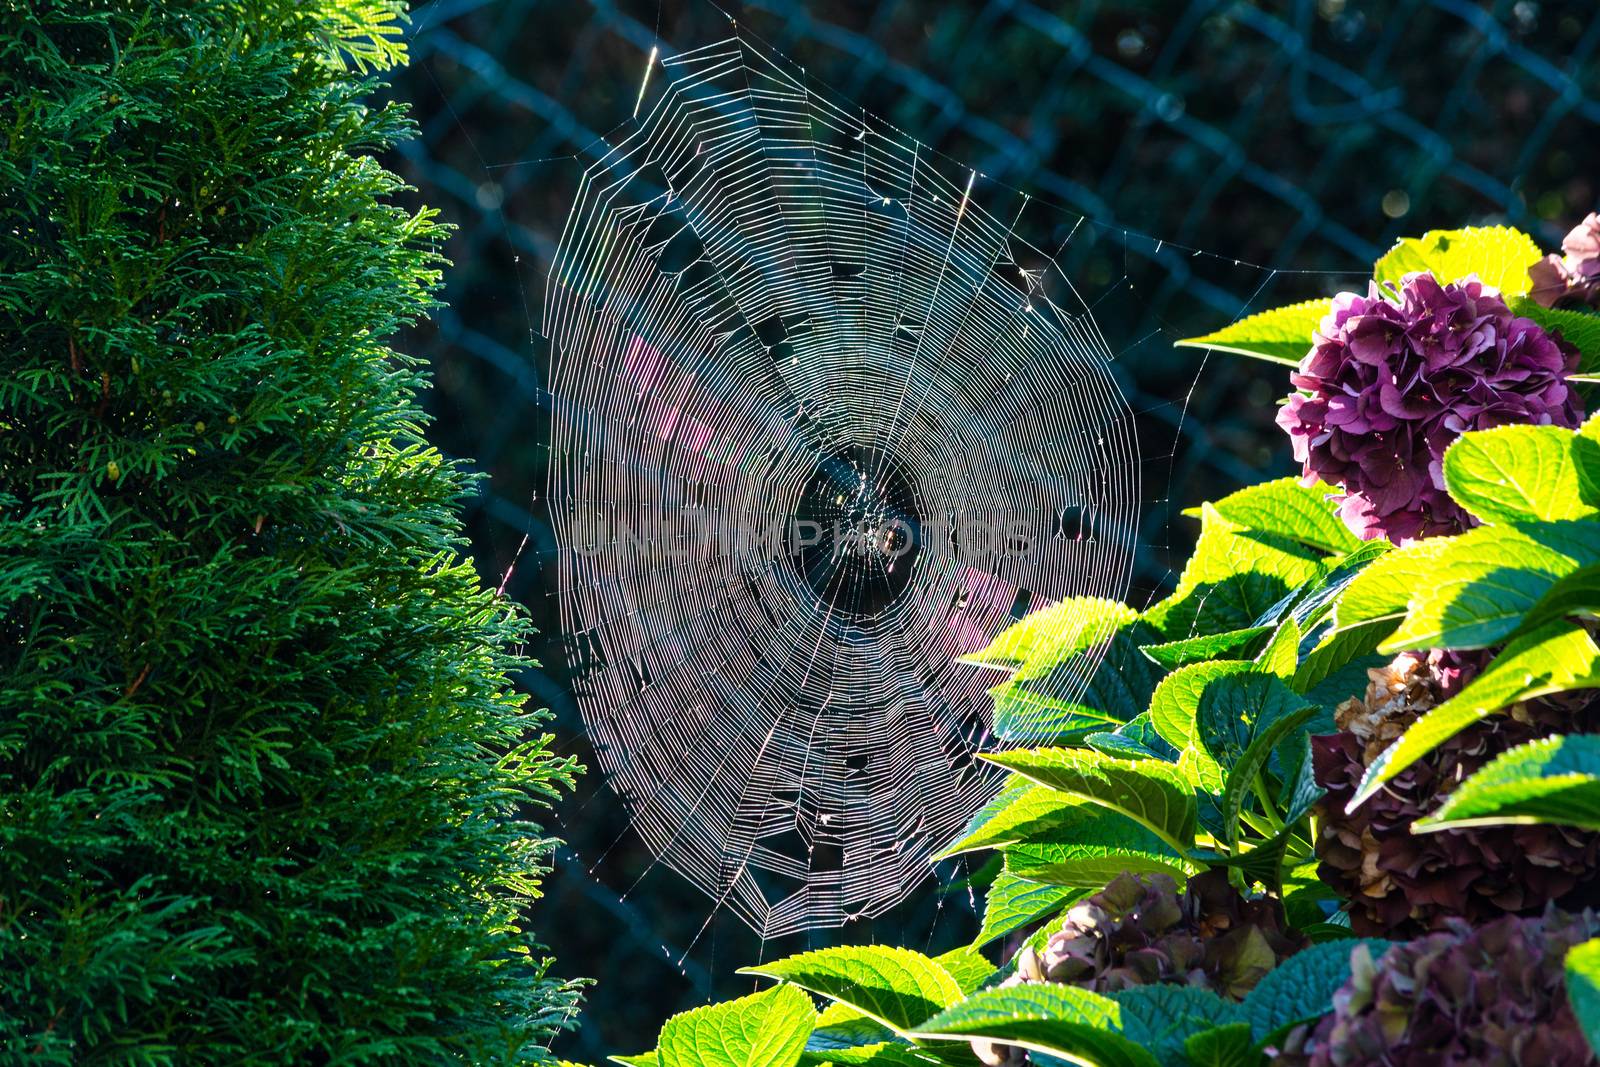 The spider's web or cobweb close up with colorful background.